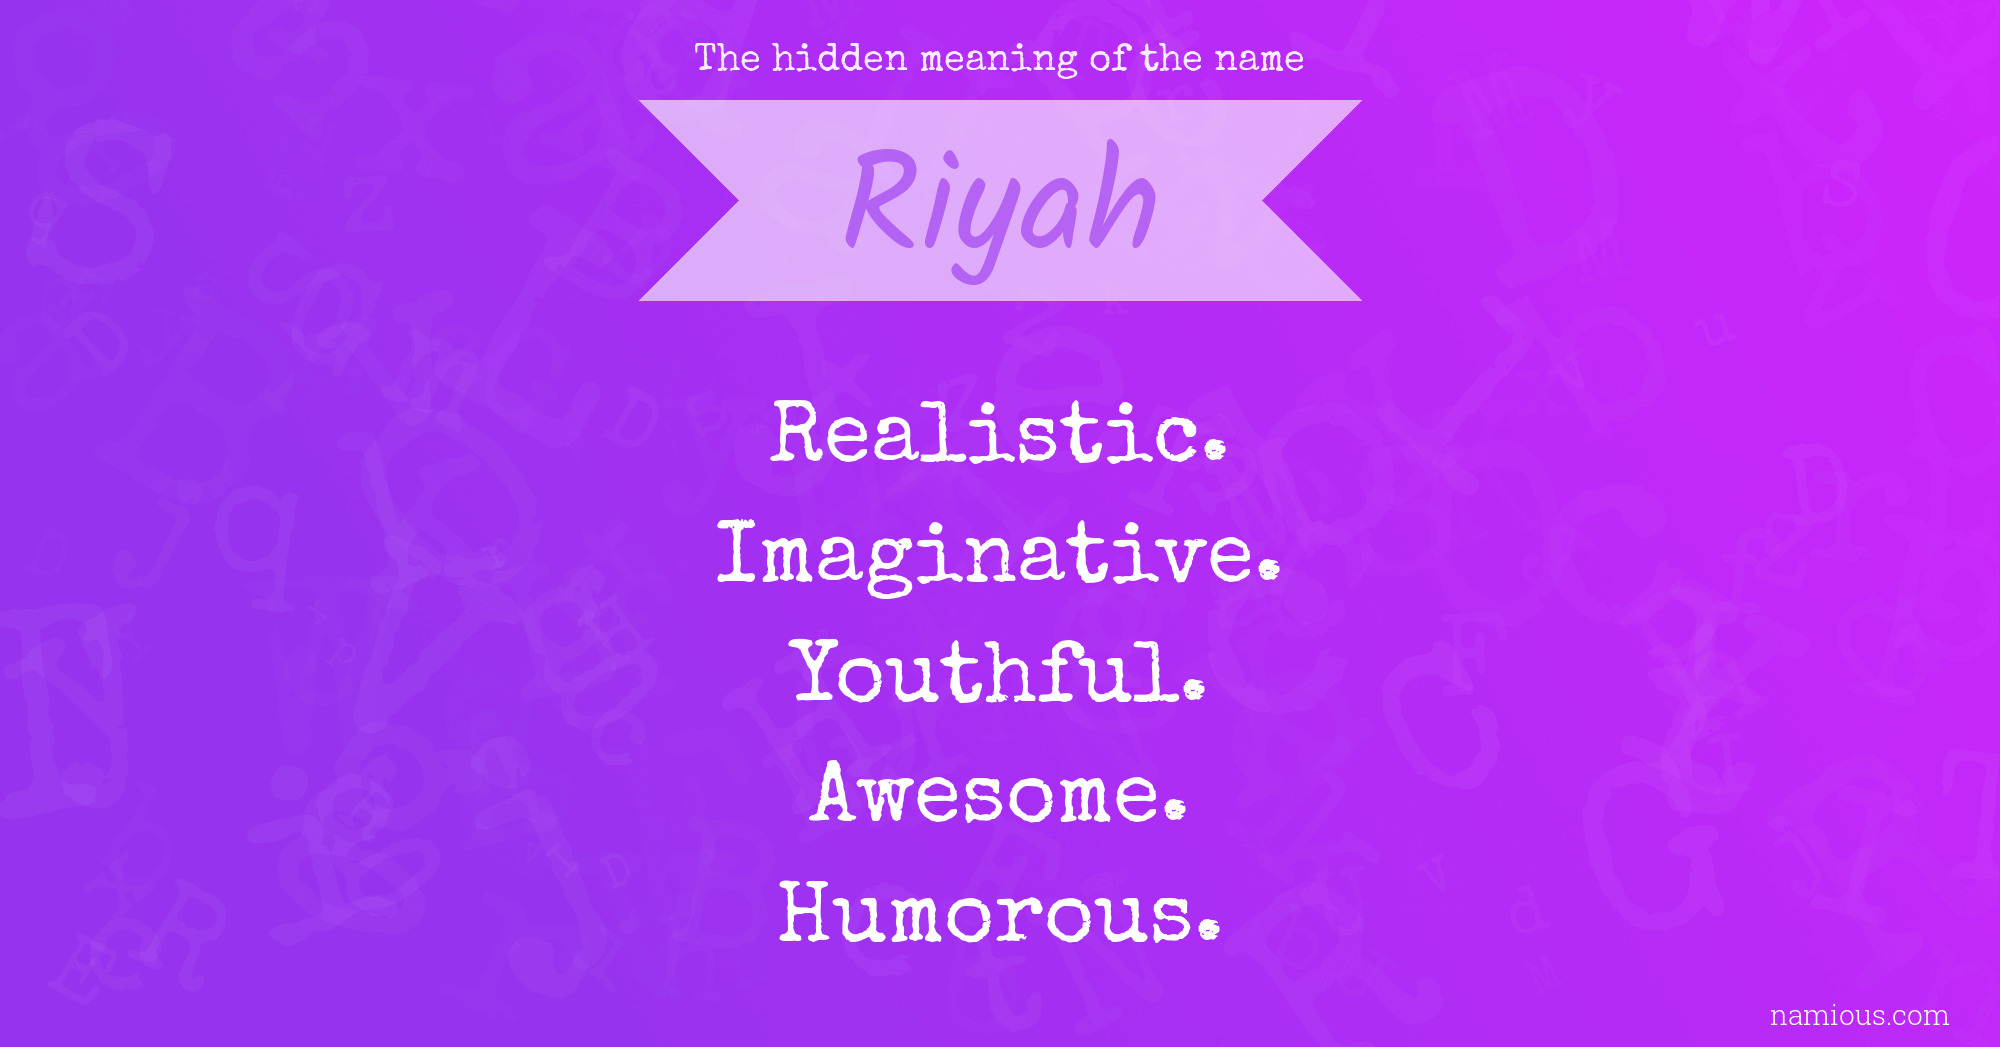 The hidden meaning of the name Riyah